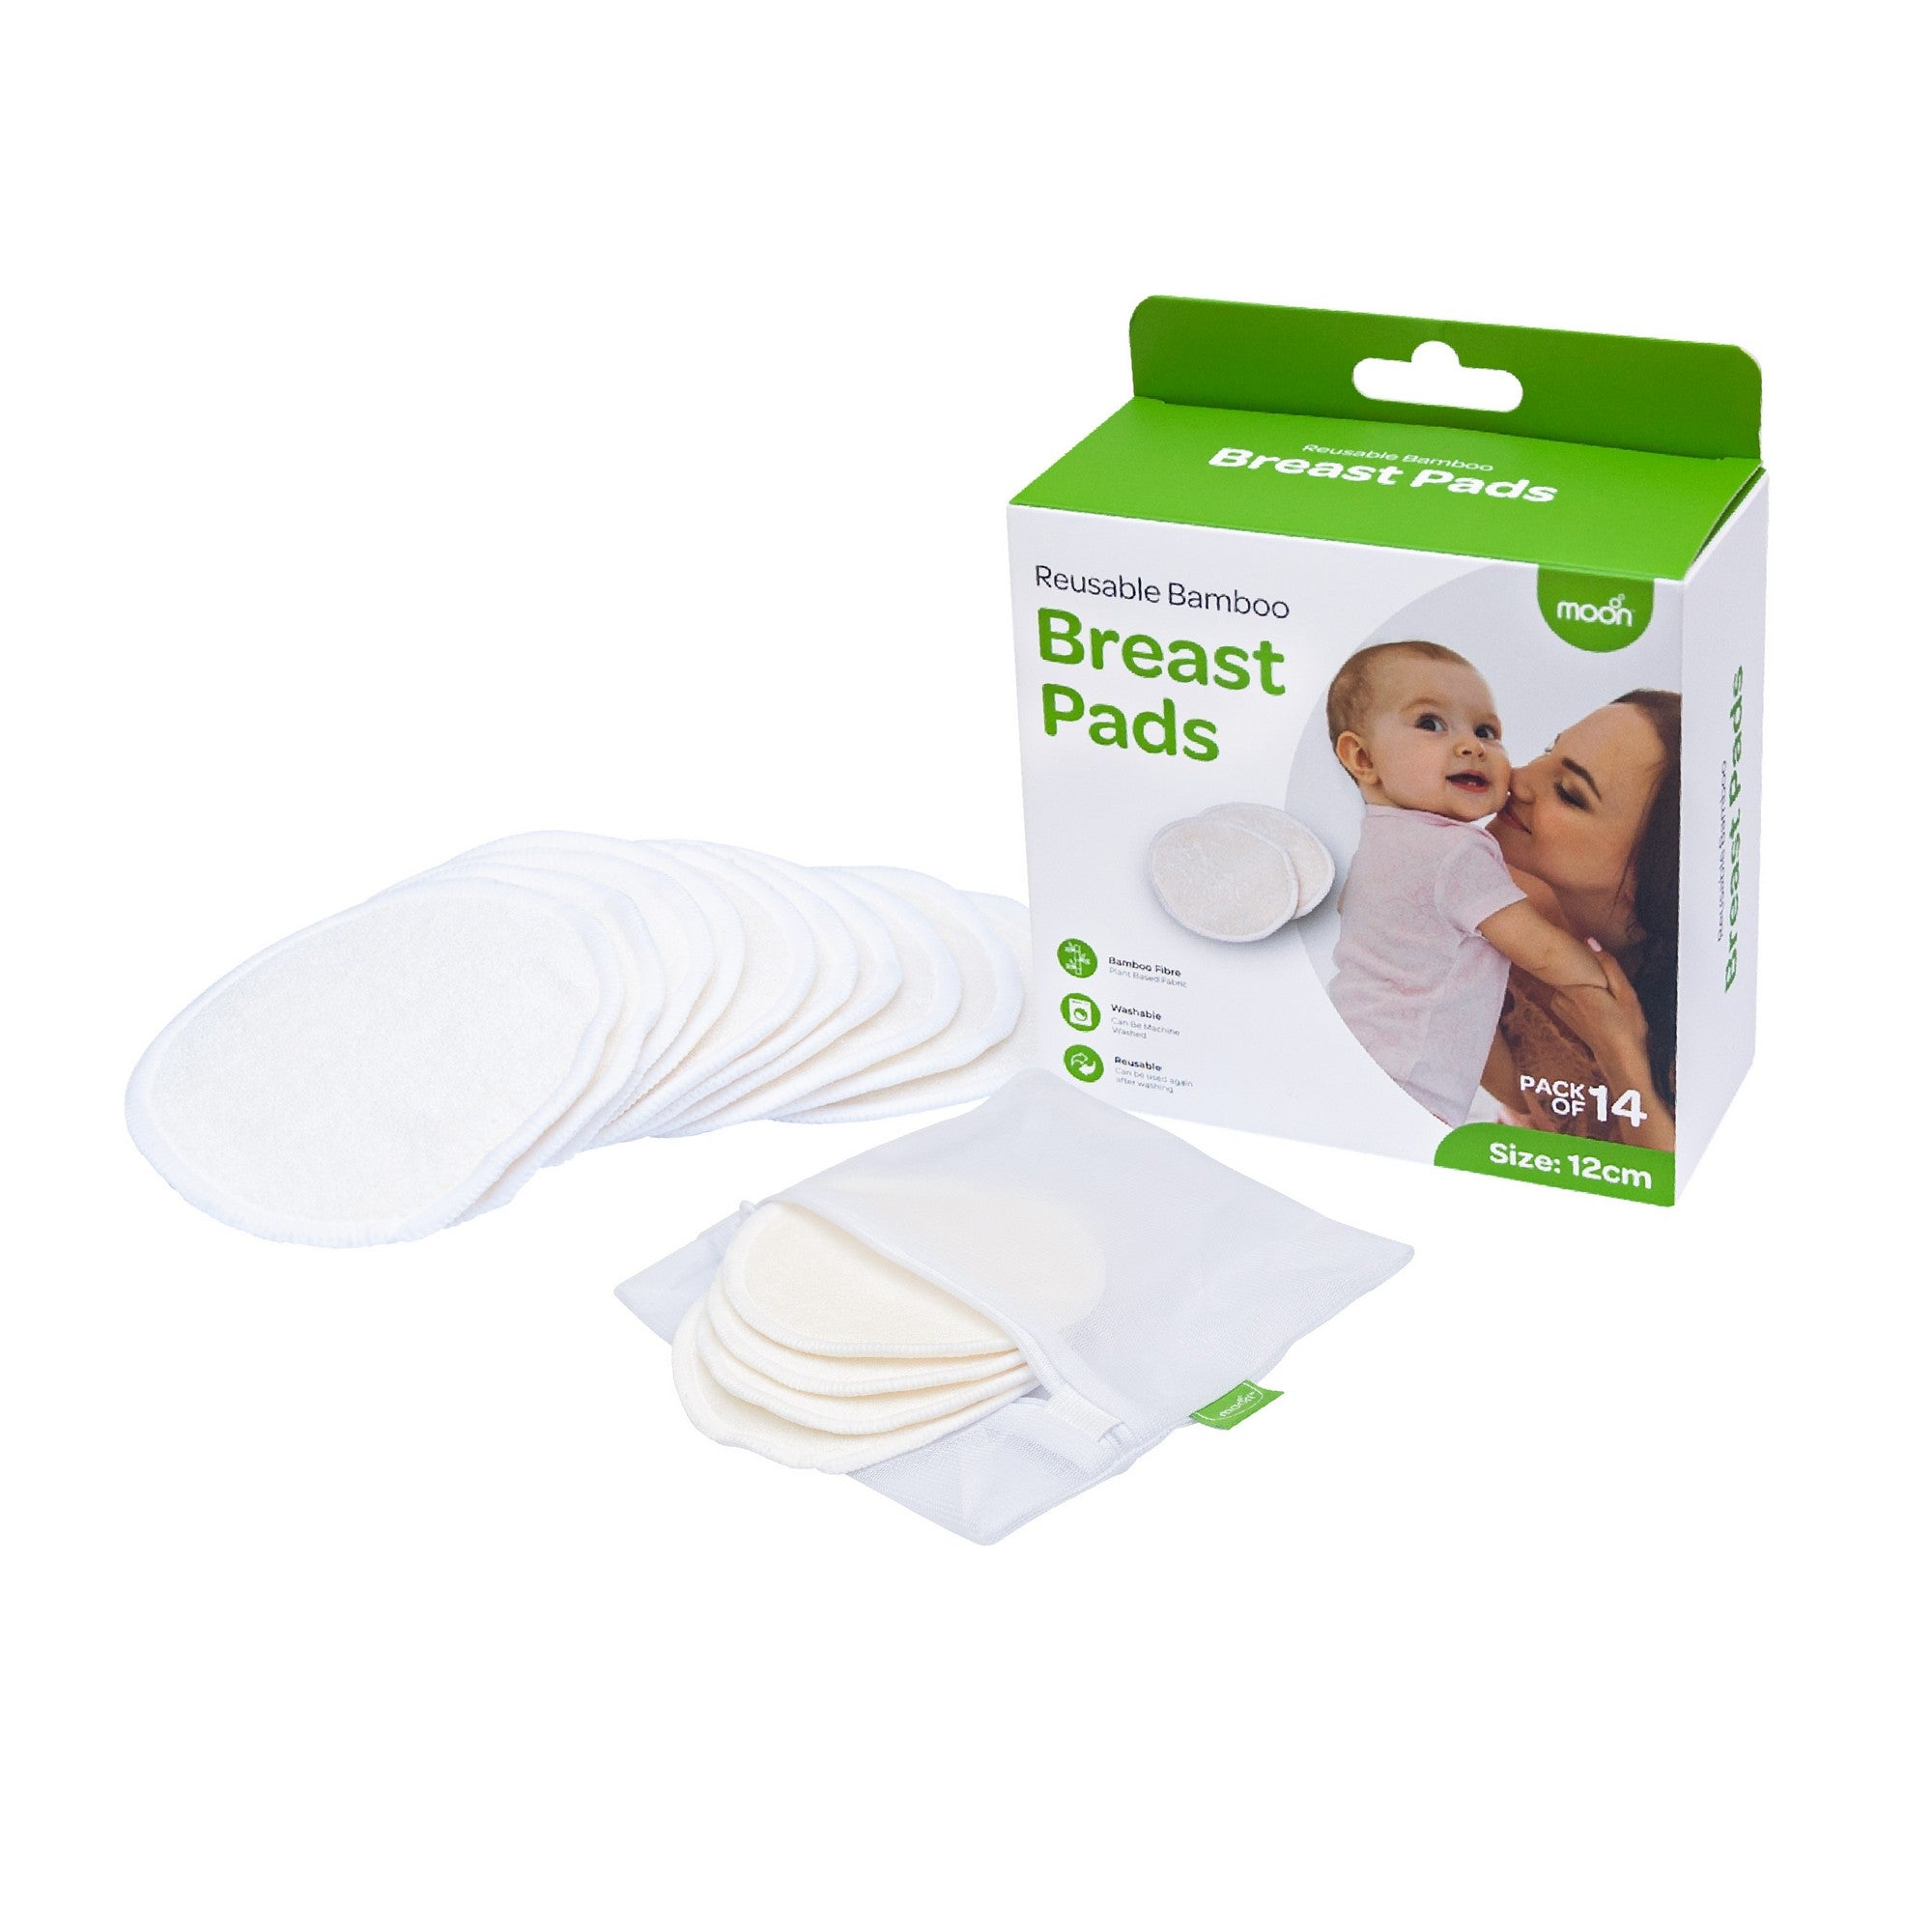 Moon Reusable Breast Pads Maternity Accessories White Adult